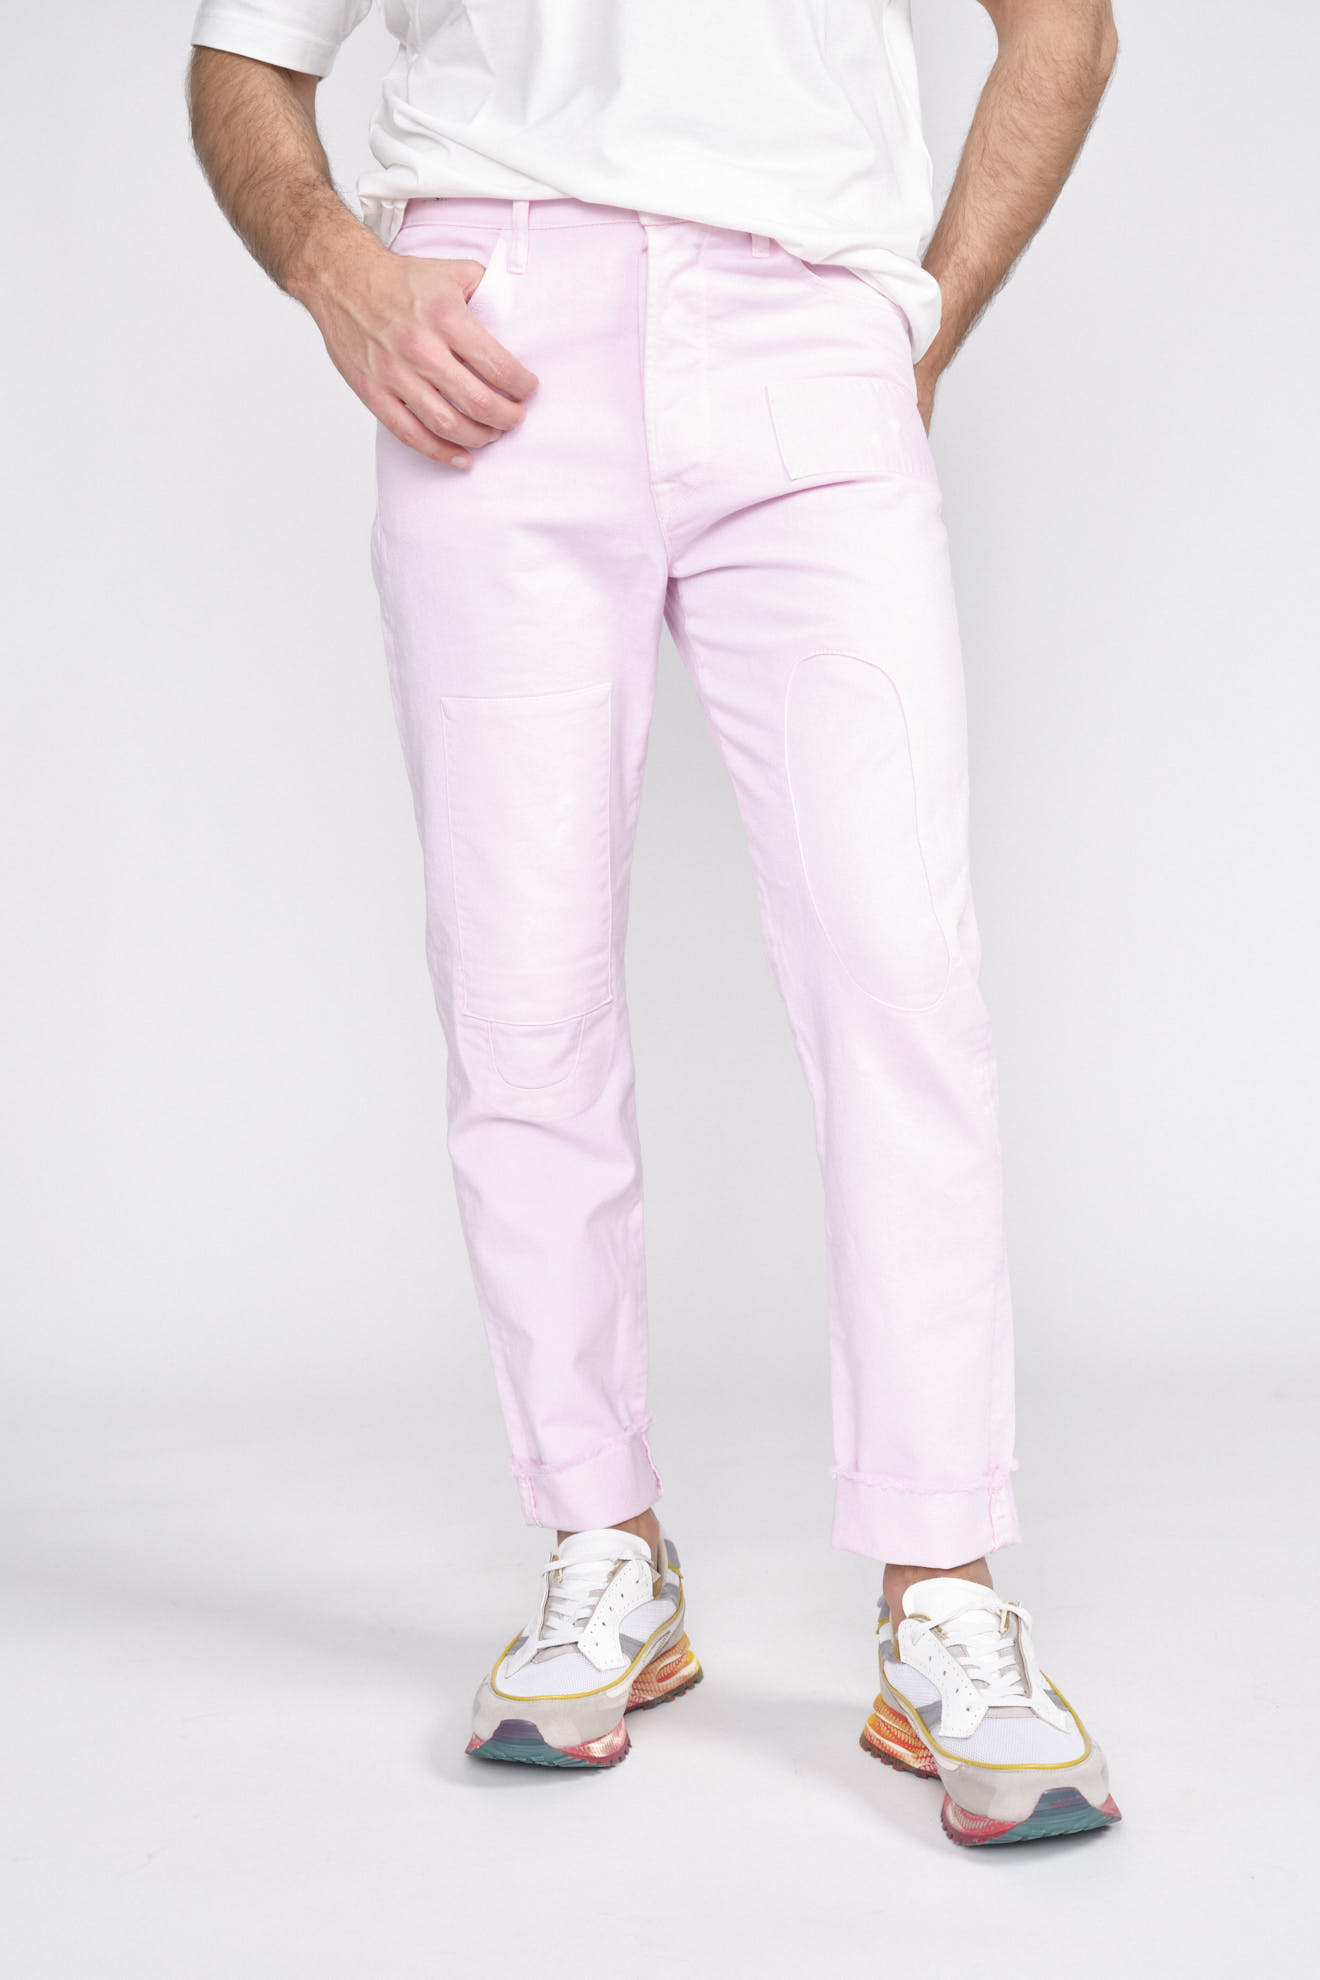 maurizio massimino Jose - denim jeans with patch patches rosa 52